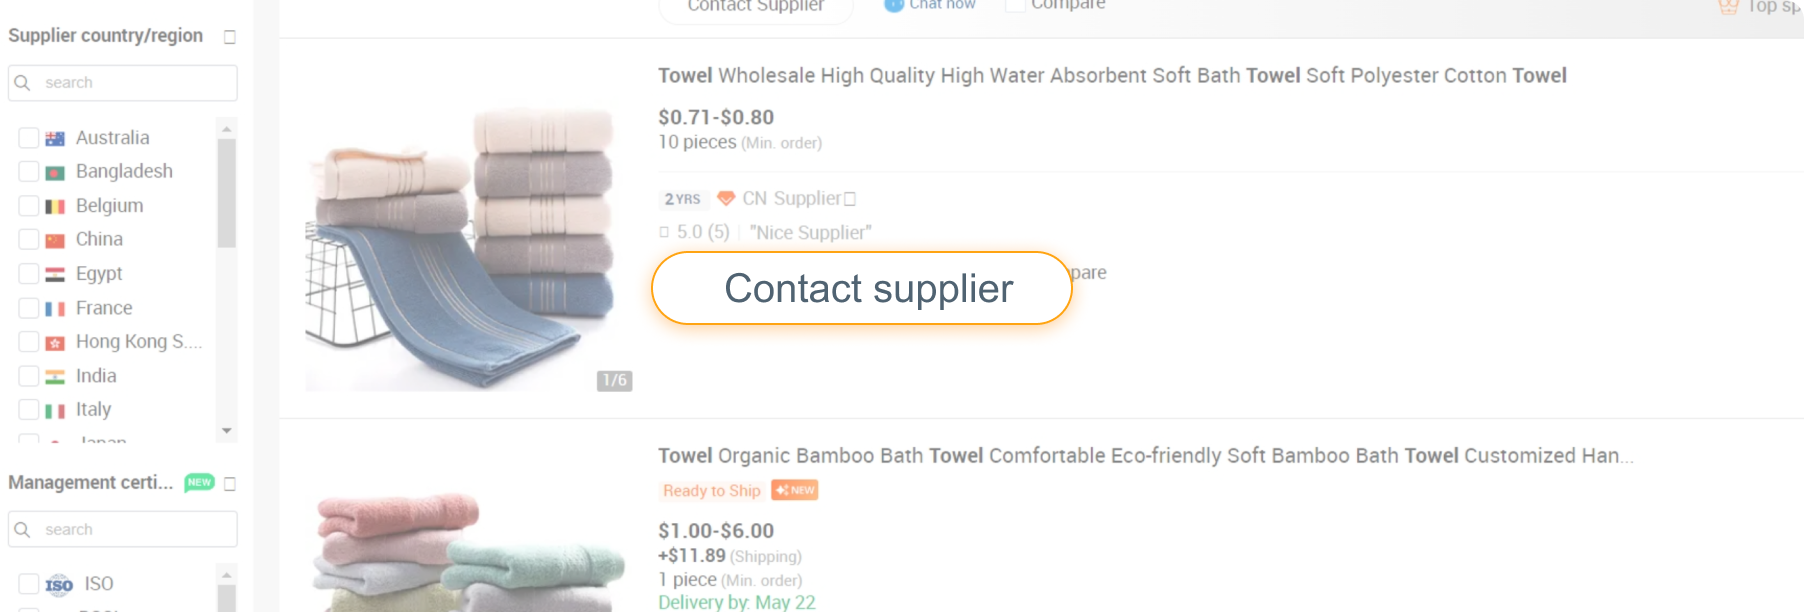 How to contact supplier on Alibaba